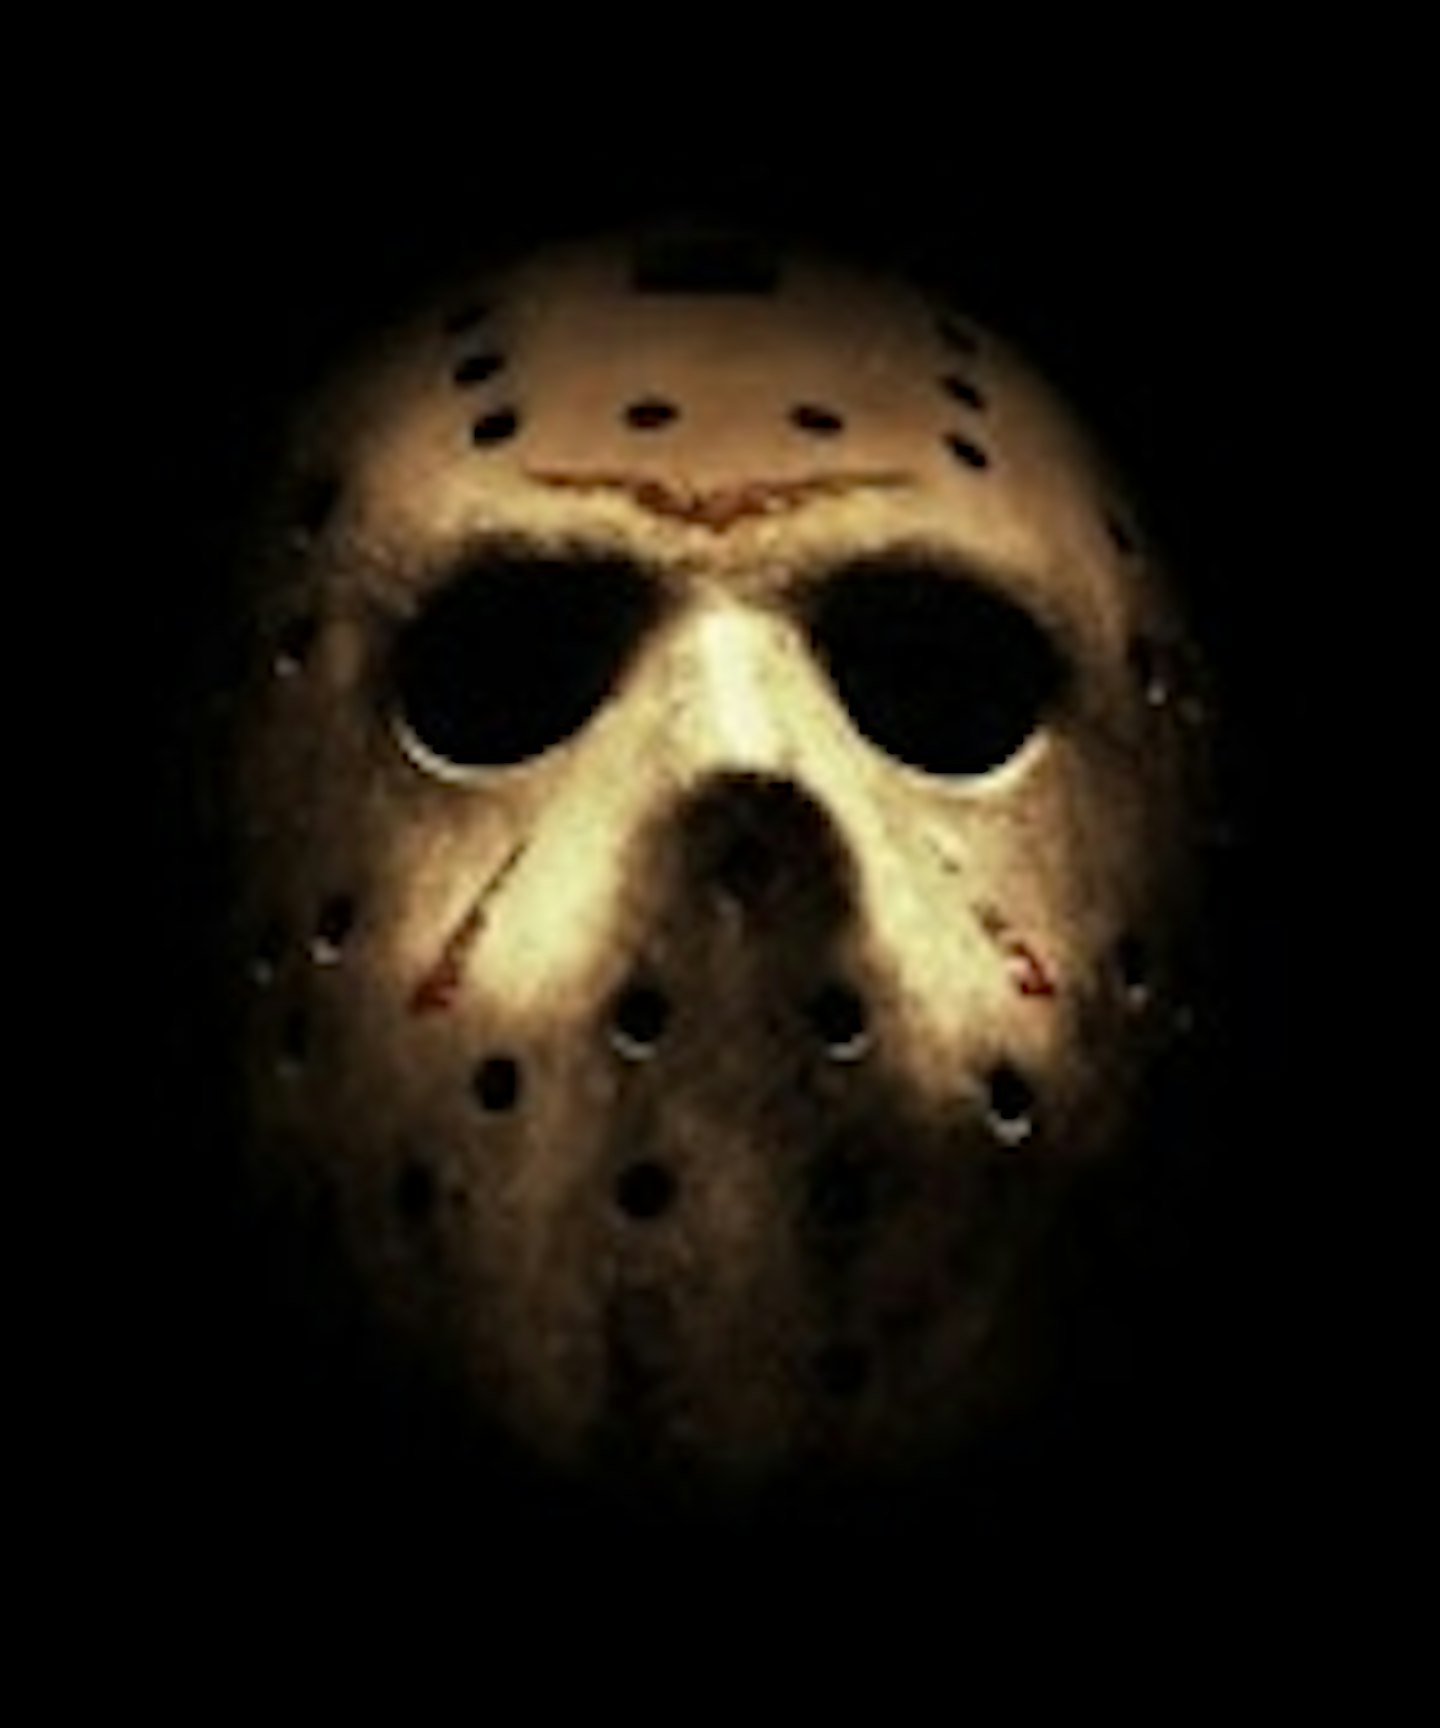 Friday The 13th Sequel Cancelled?